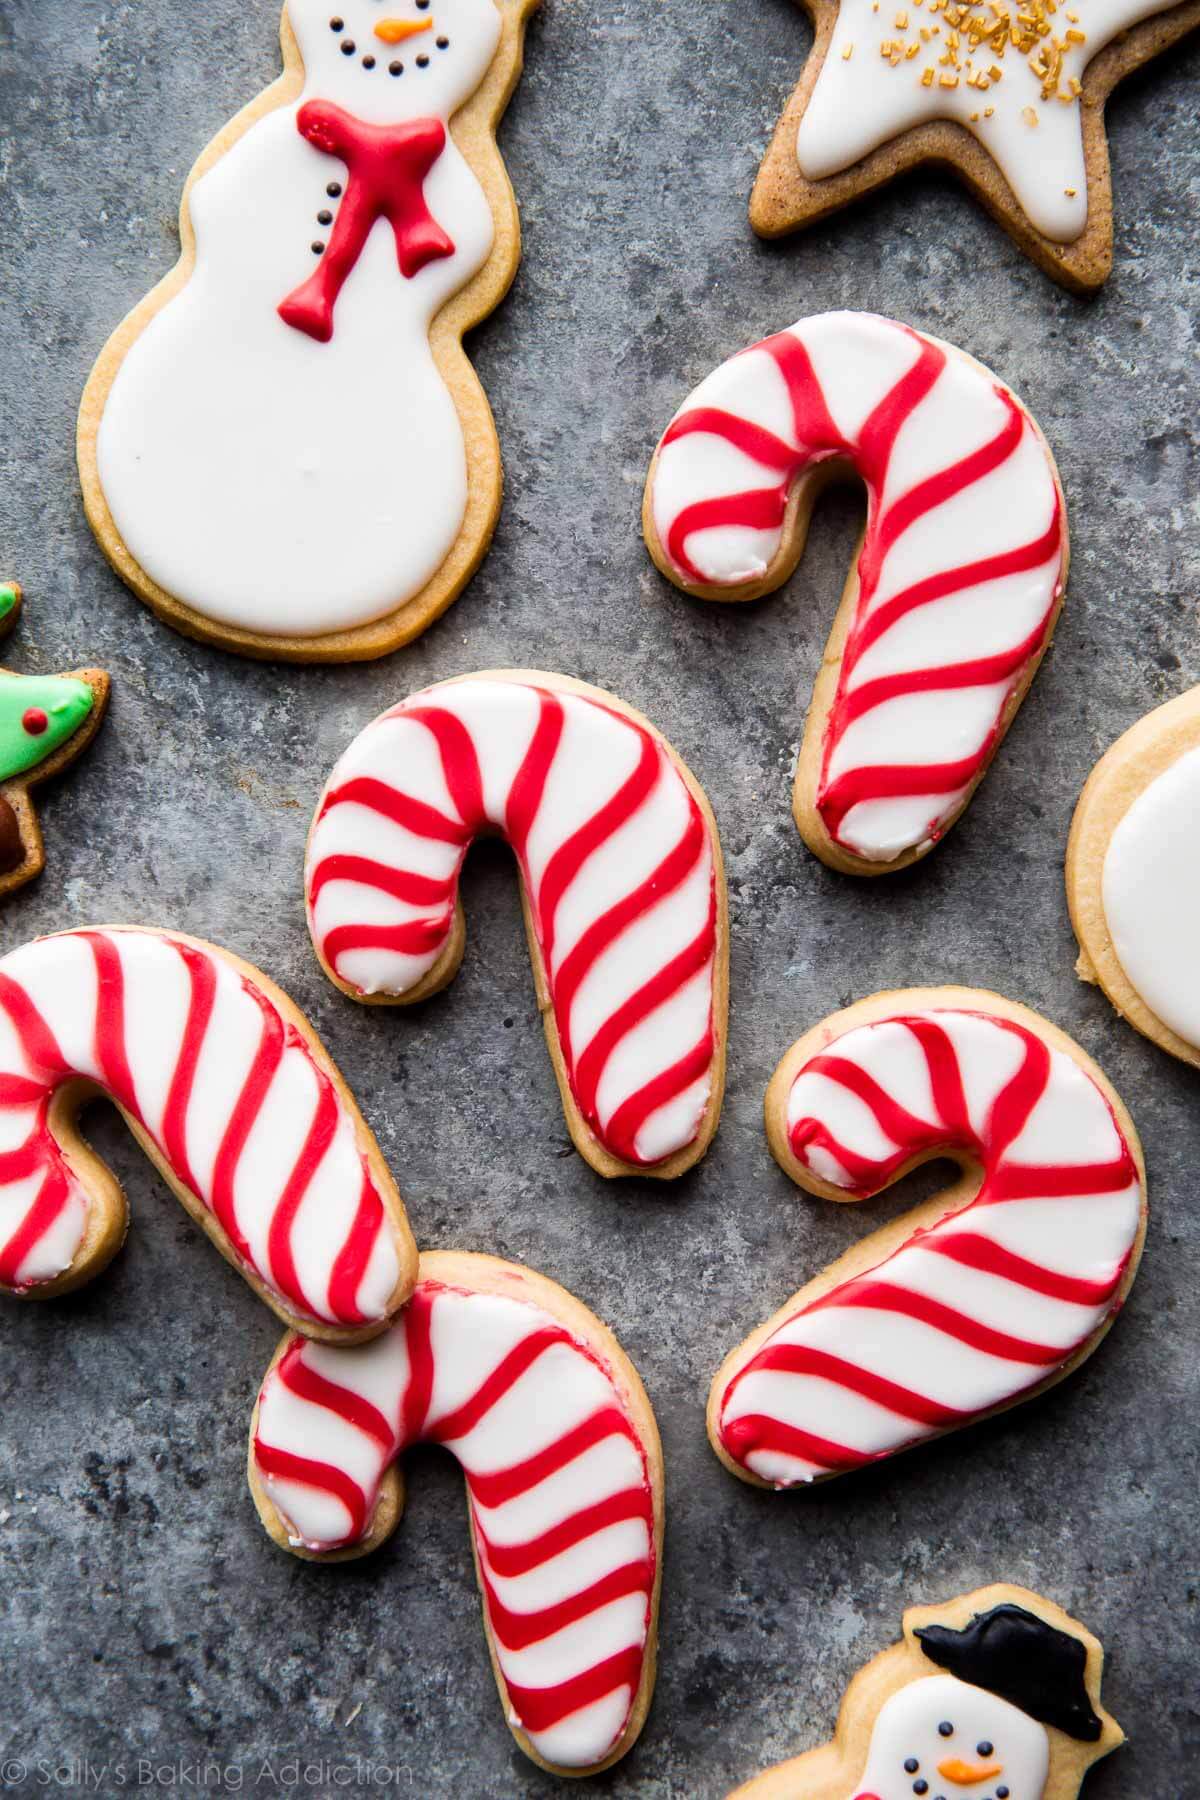 candy cane and snowman decorated sugar cookies for the holidays